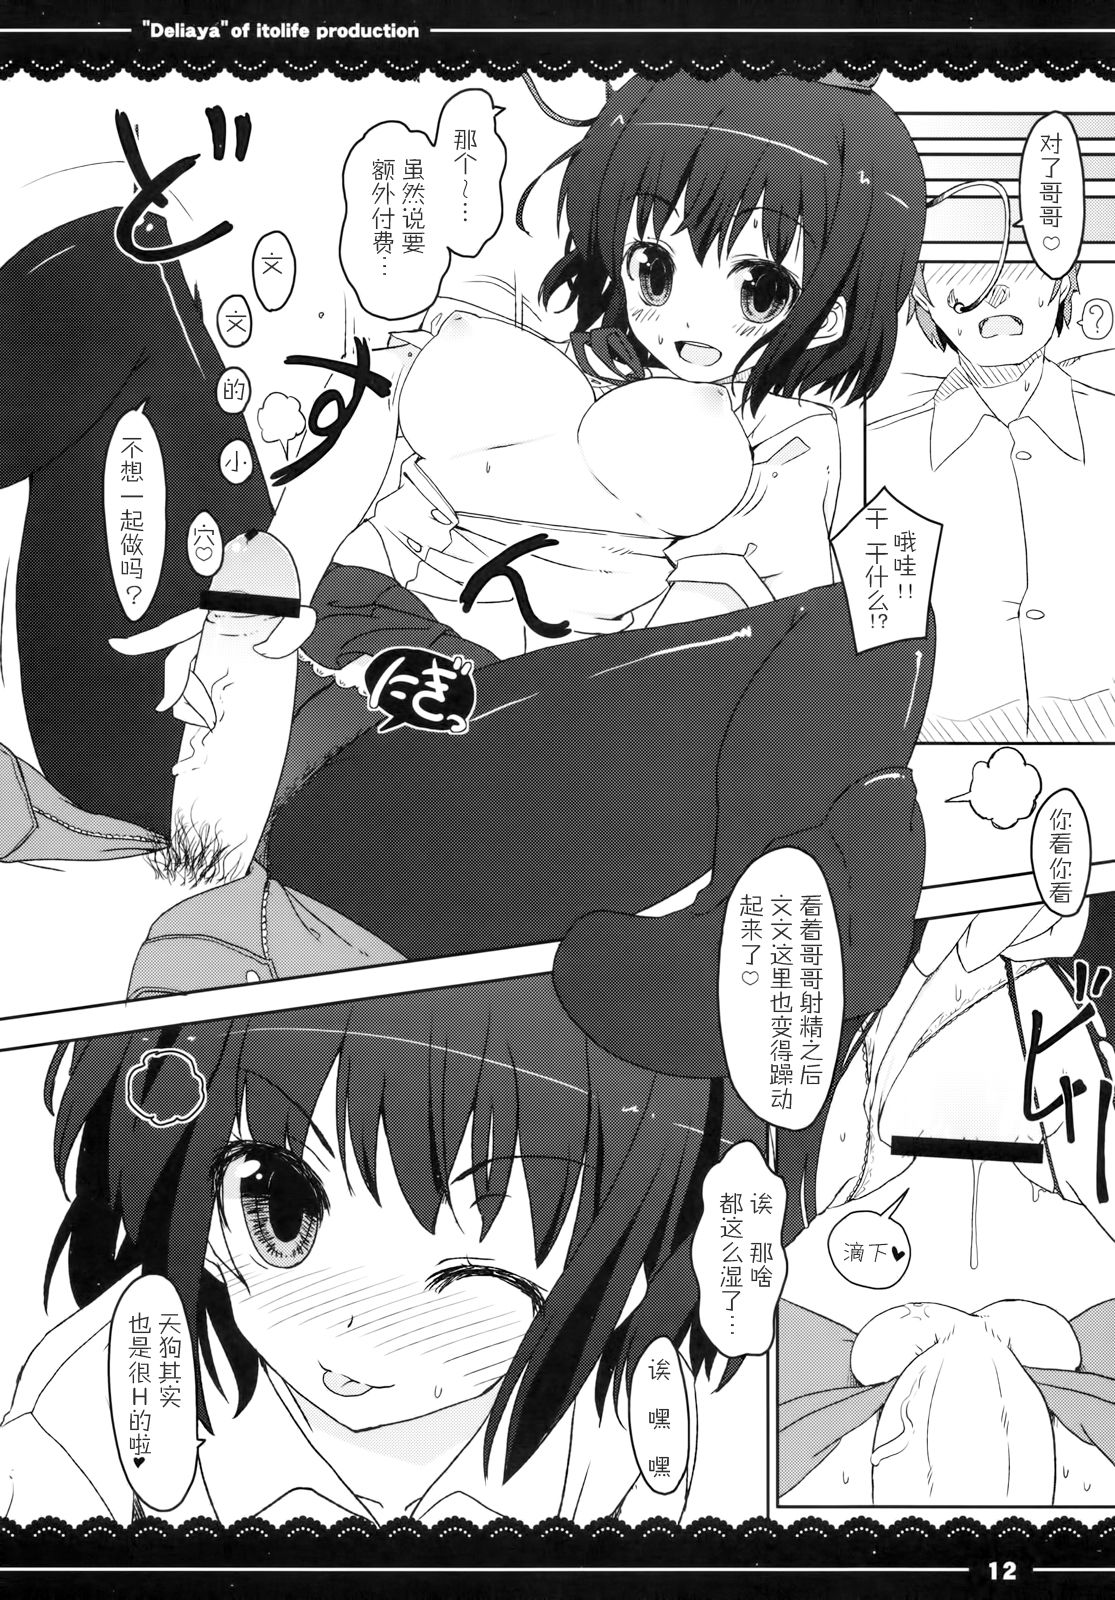 (Reitaisai 7) [Itou Life] deliaya (Touhou Project) [Chinese] [伞尖绅士汉化组] (例大祭7) [伊東ライフ] でりあや (東方Project) [中文翻譯]